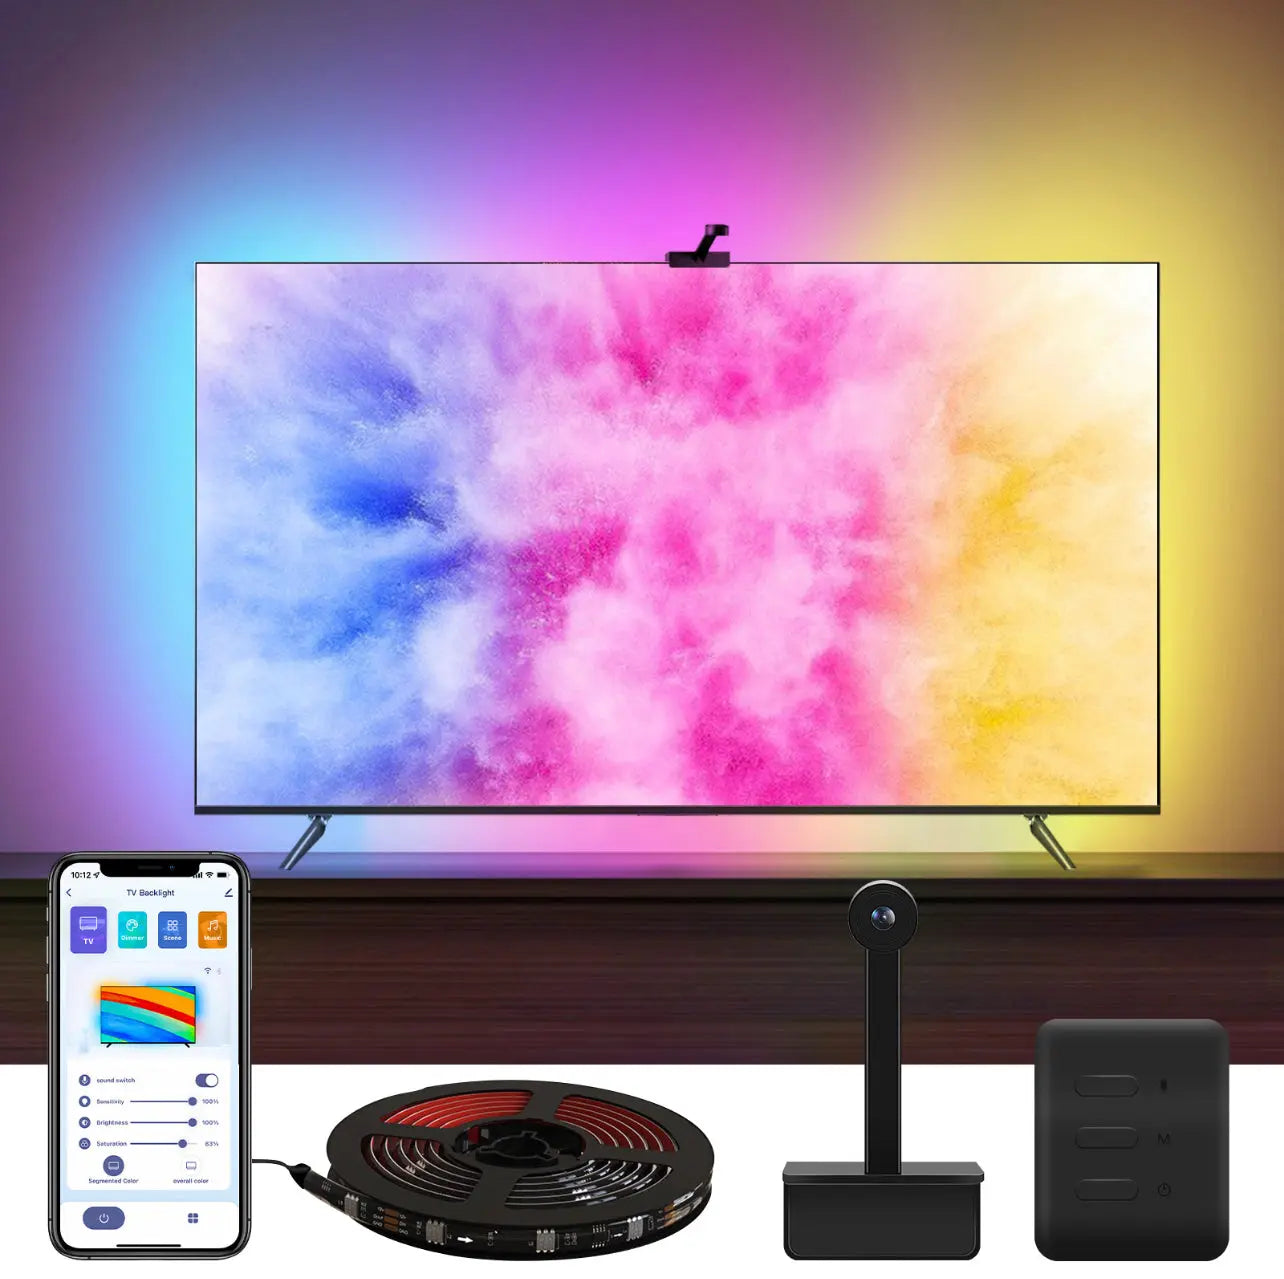 Govee TV LED Backlight, RGBIC TV Backlight for 55-65 inch TVs, Smart LED  Lights for TV with Bluetooth and Wi-Fi Control, Works with Alexa & Google